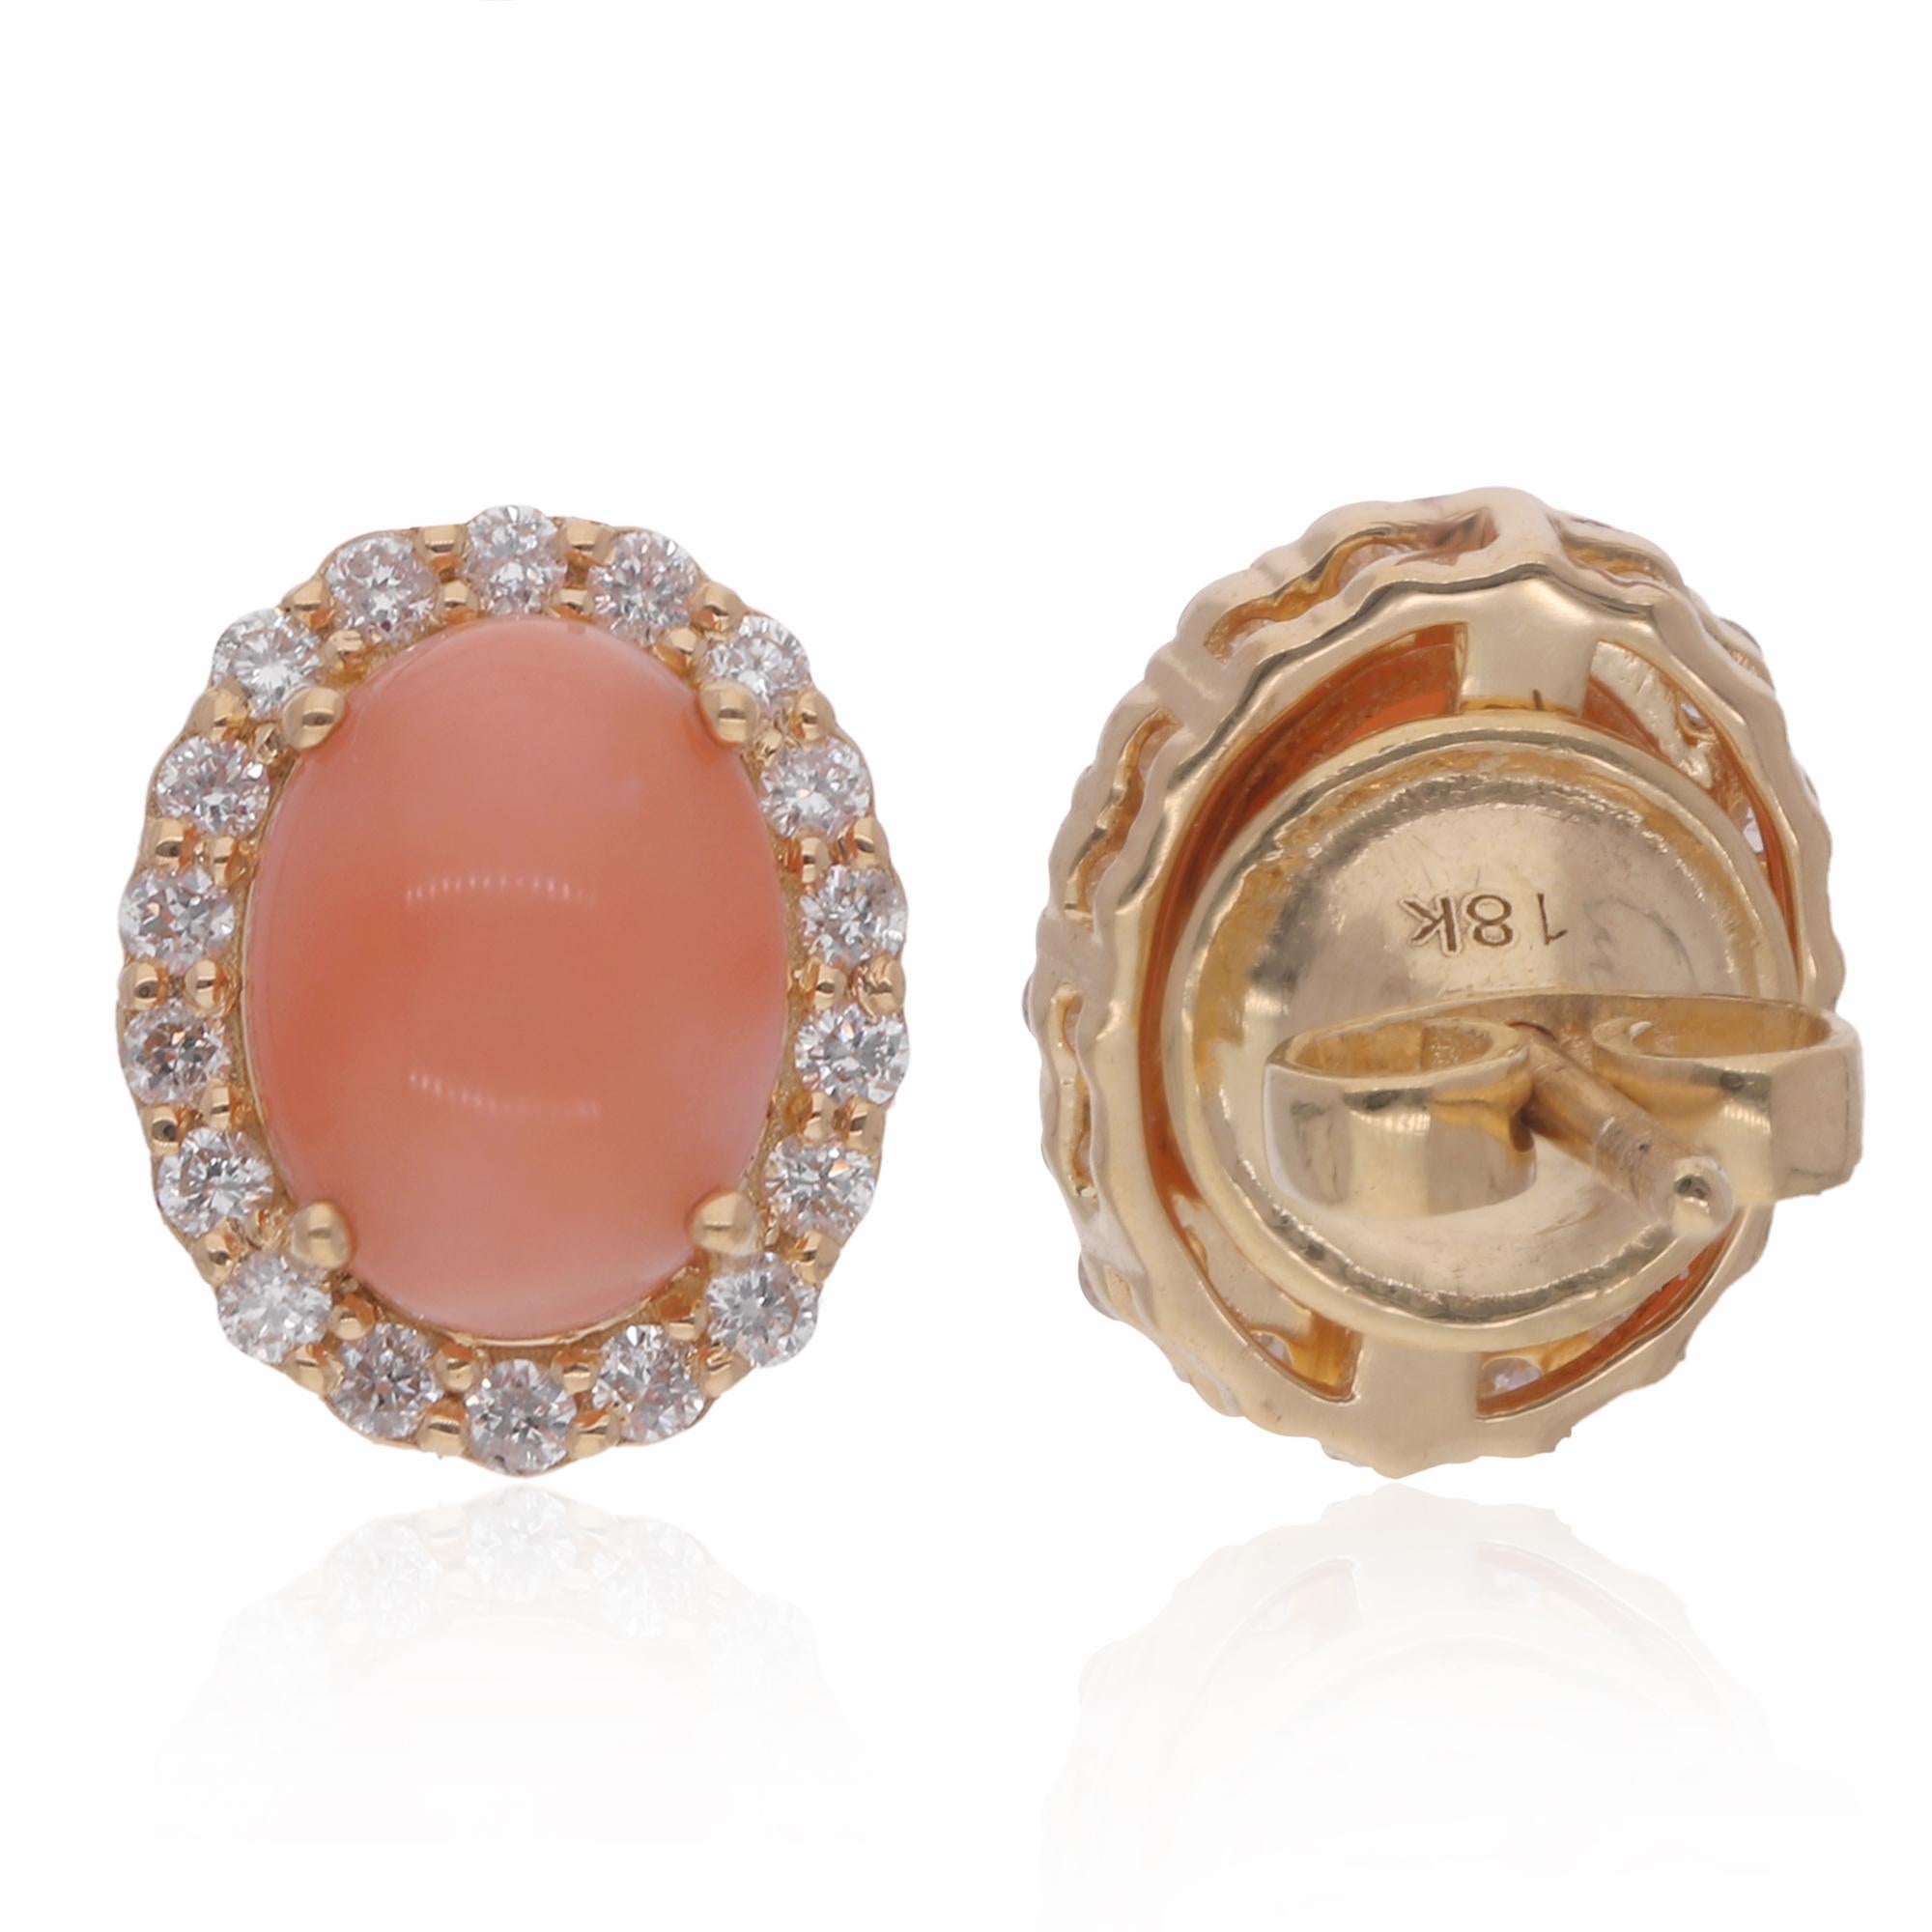 Item Code :- SEE-15513
Gross Wt. :- 3.47 gm
18k Solid Yellow Gold Wt. :- 2.93 gm
Natural Diamond Wt. :- 0.35 Ct. ( AVERAGE DIAMOND CLARITY SI1-SI2 & COLOR H-I )
Coral Wt. :- 2.33 Ct.
Earrings Size :- 11 x 9 mm approx.

✦